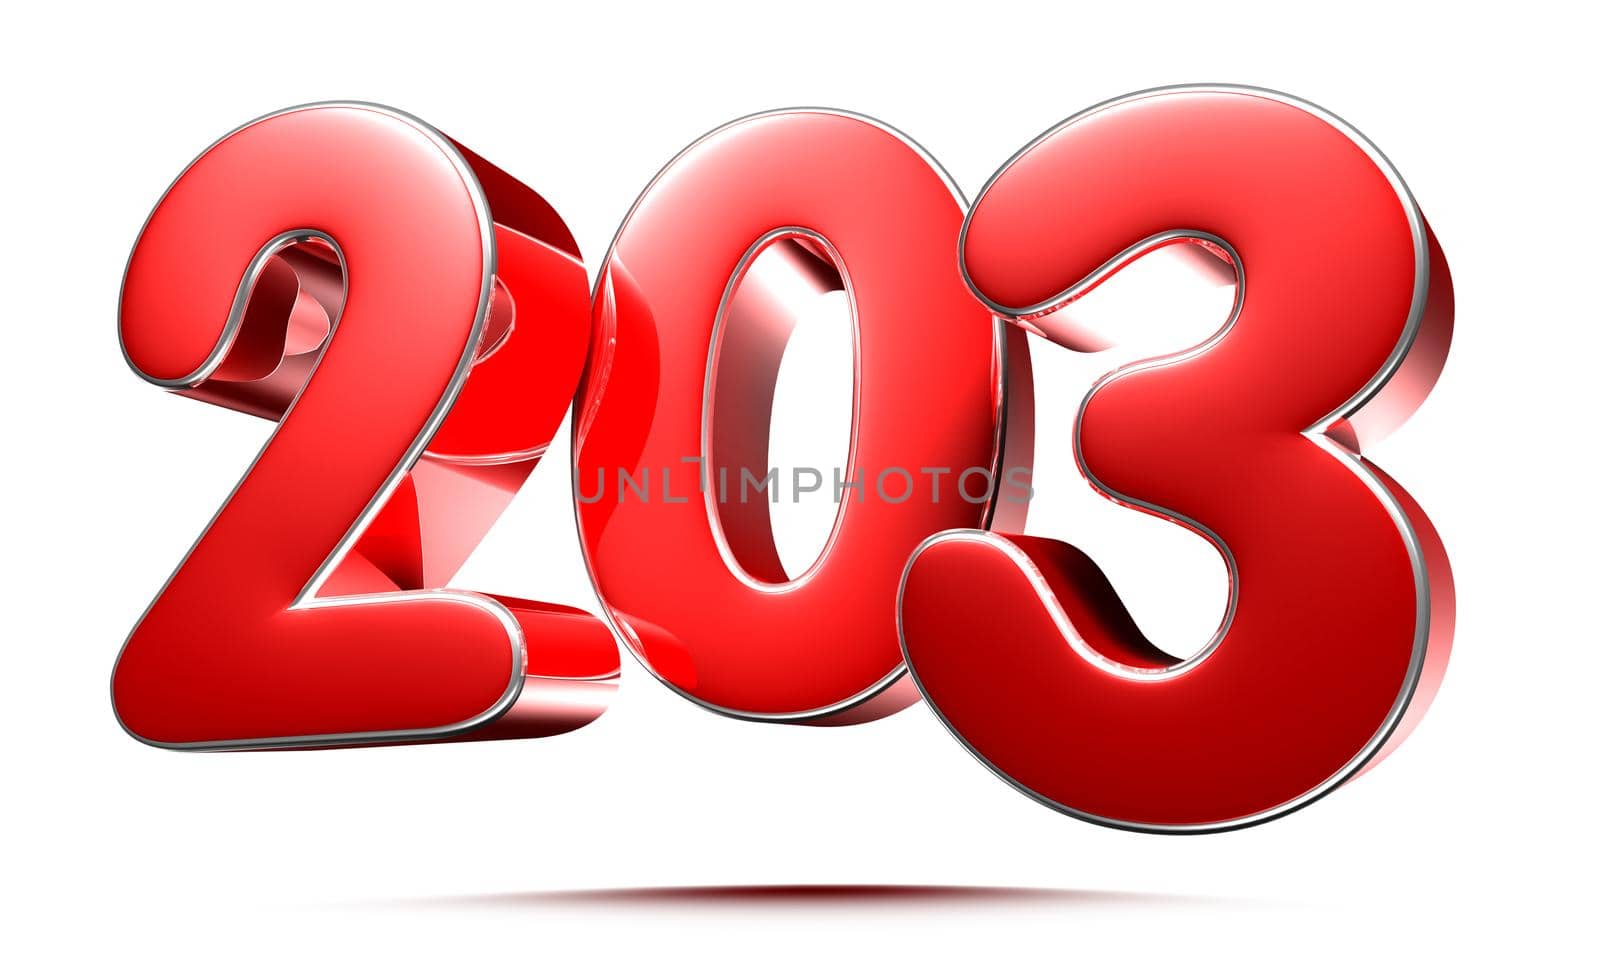 Rounded red numbers 203 on white background 3D illustration with clipping path